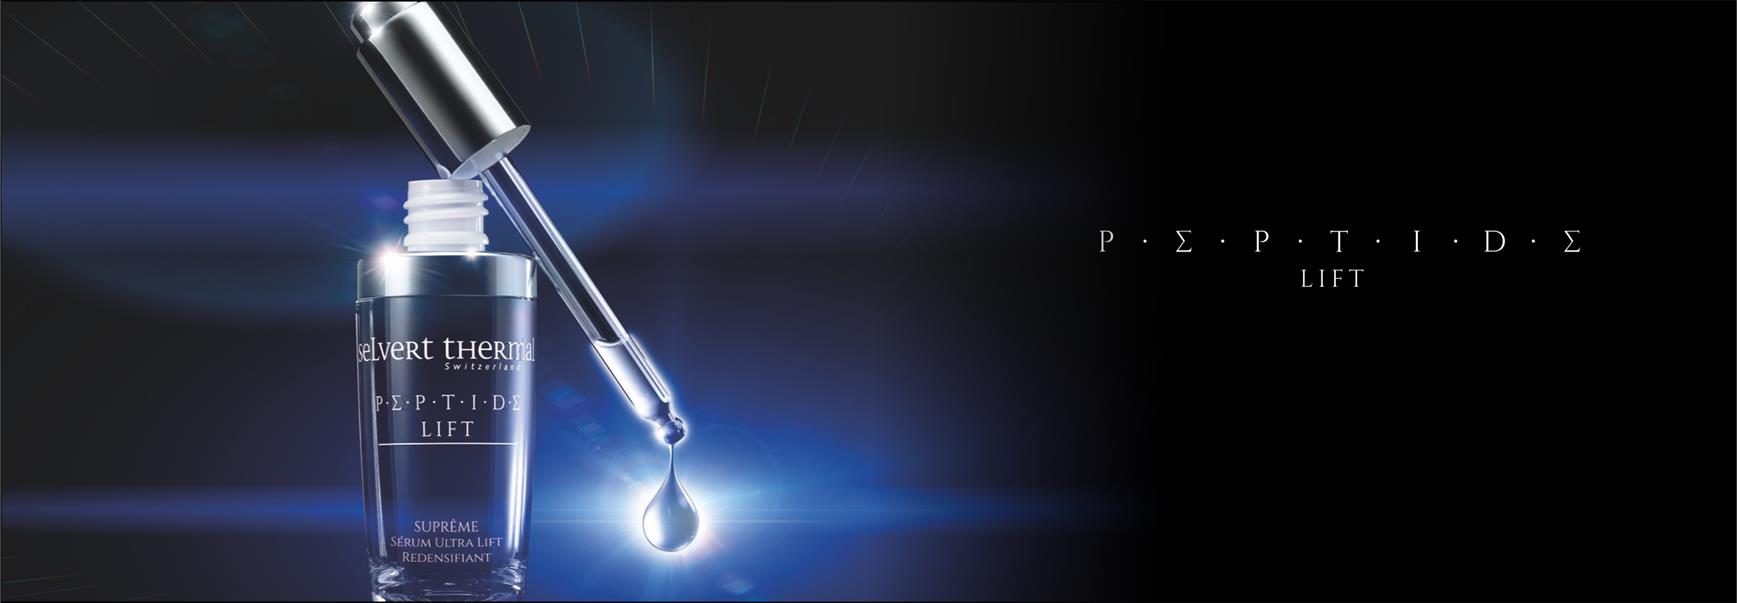 Selvert Thermal PEPTIDE LIFT